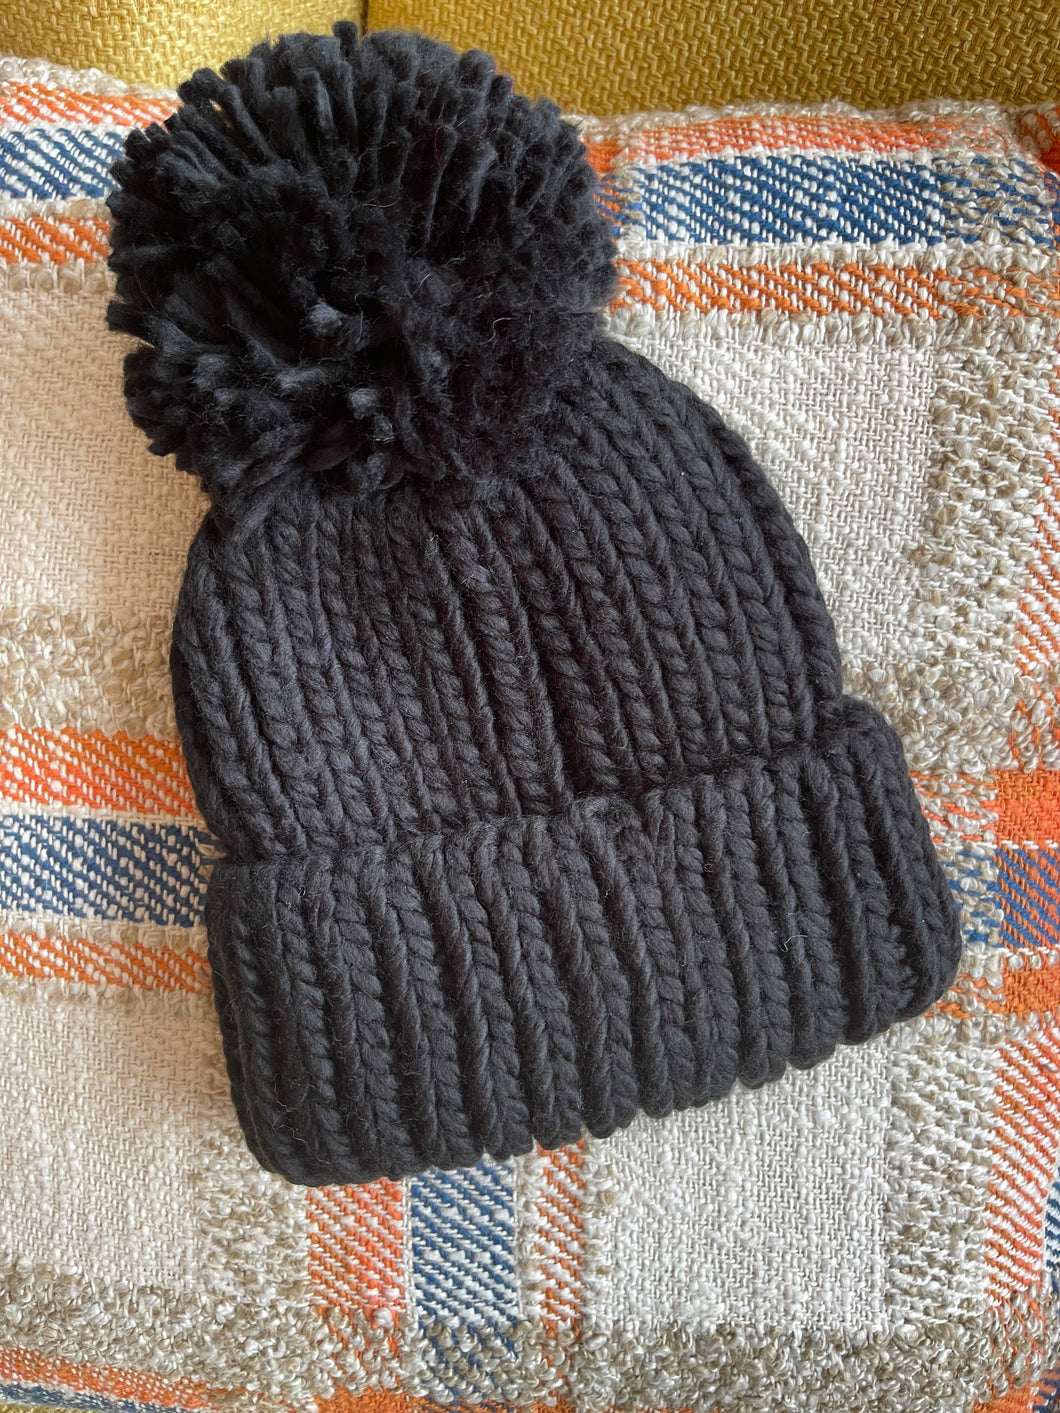 Justin Knitted Hat